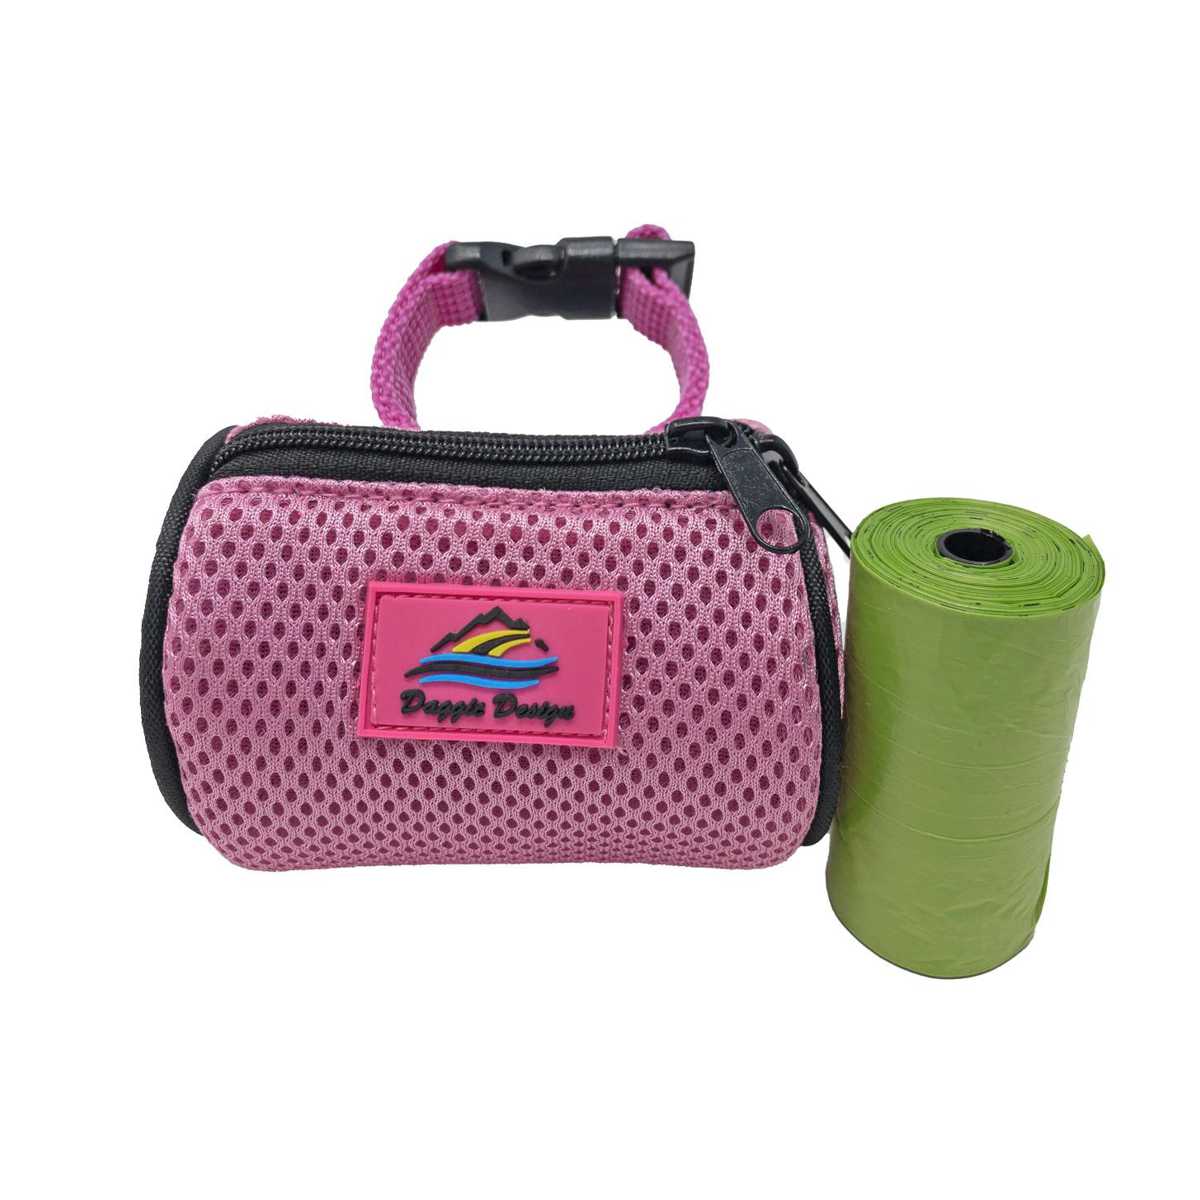 American River Waste Bag Holder in Candy Pink | Pawlicious & Company